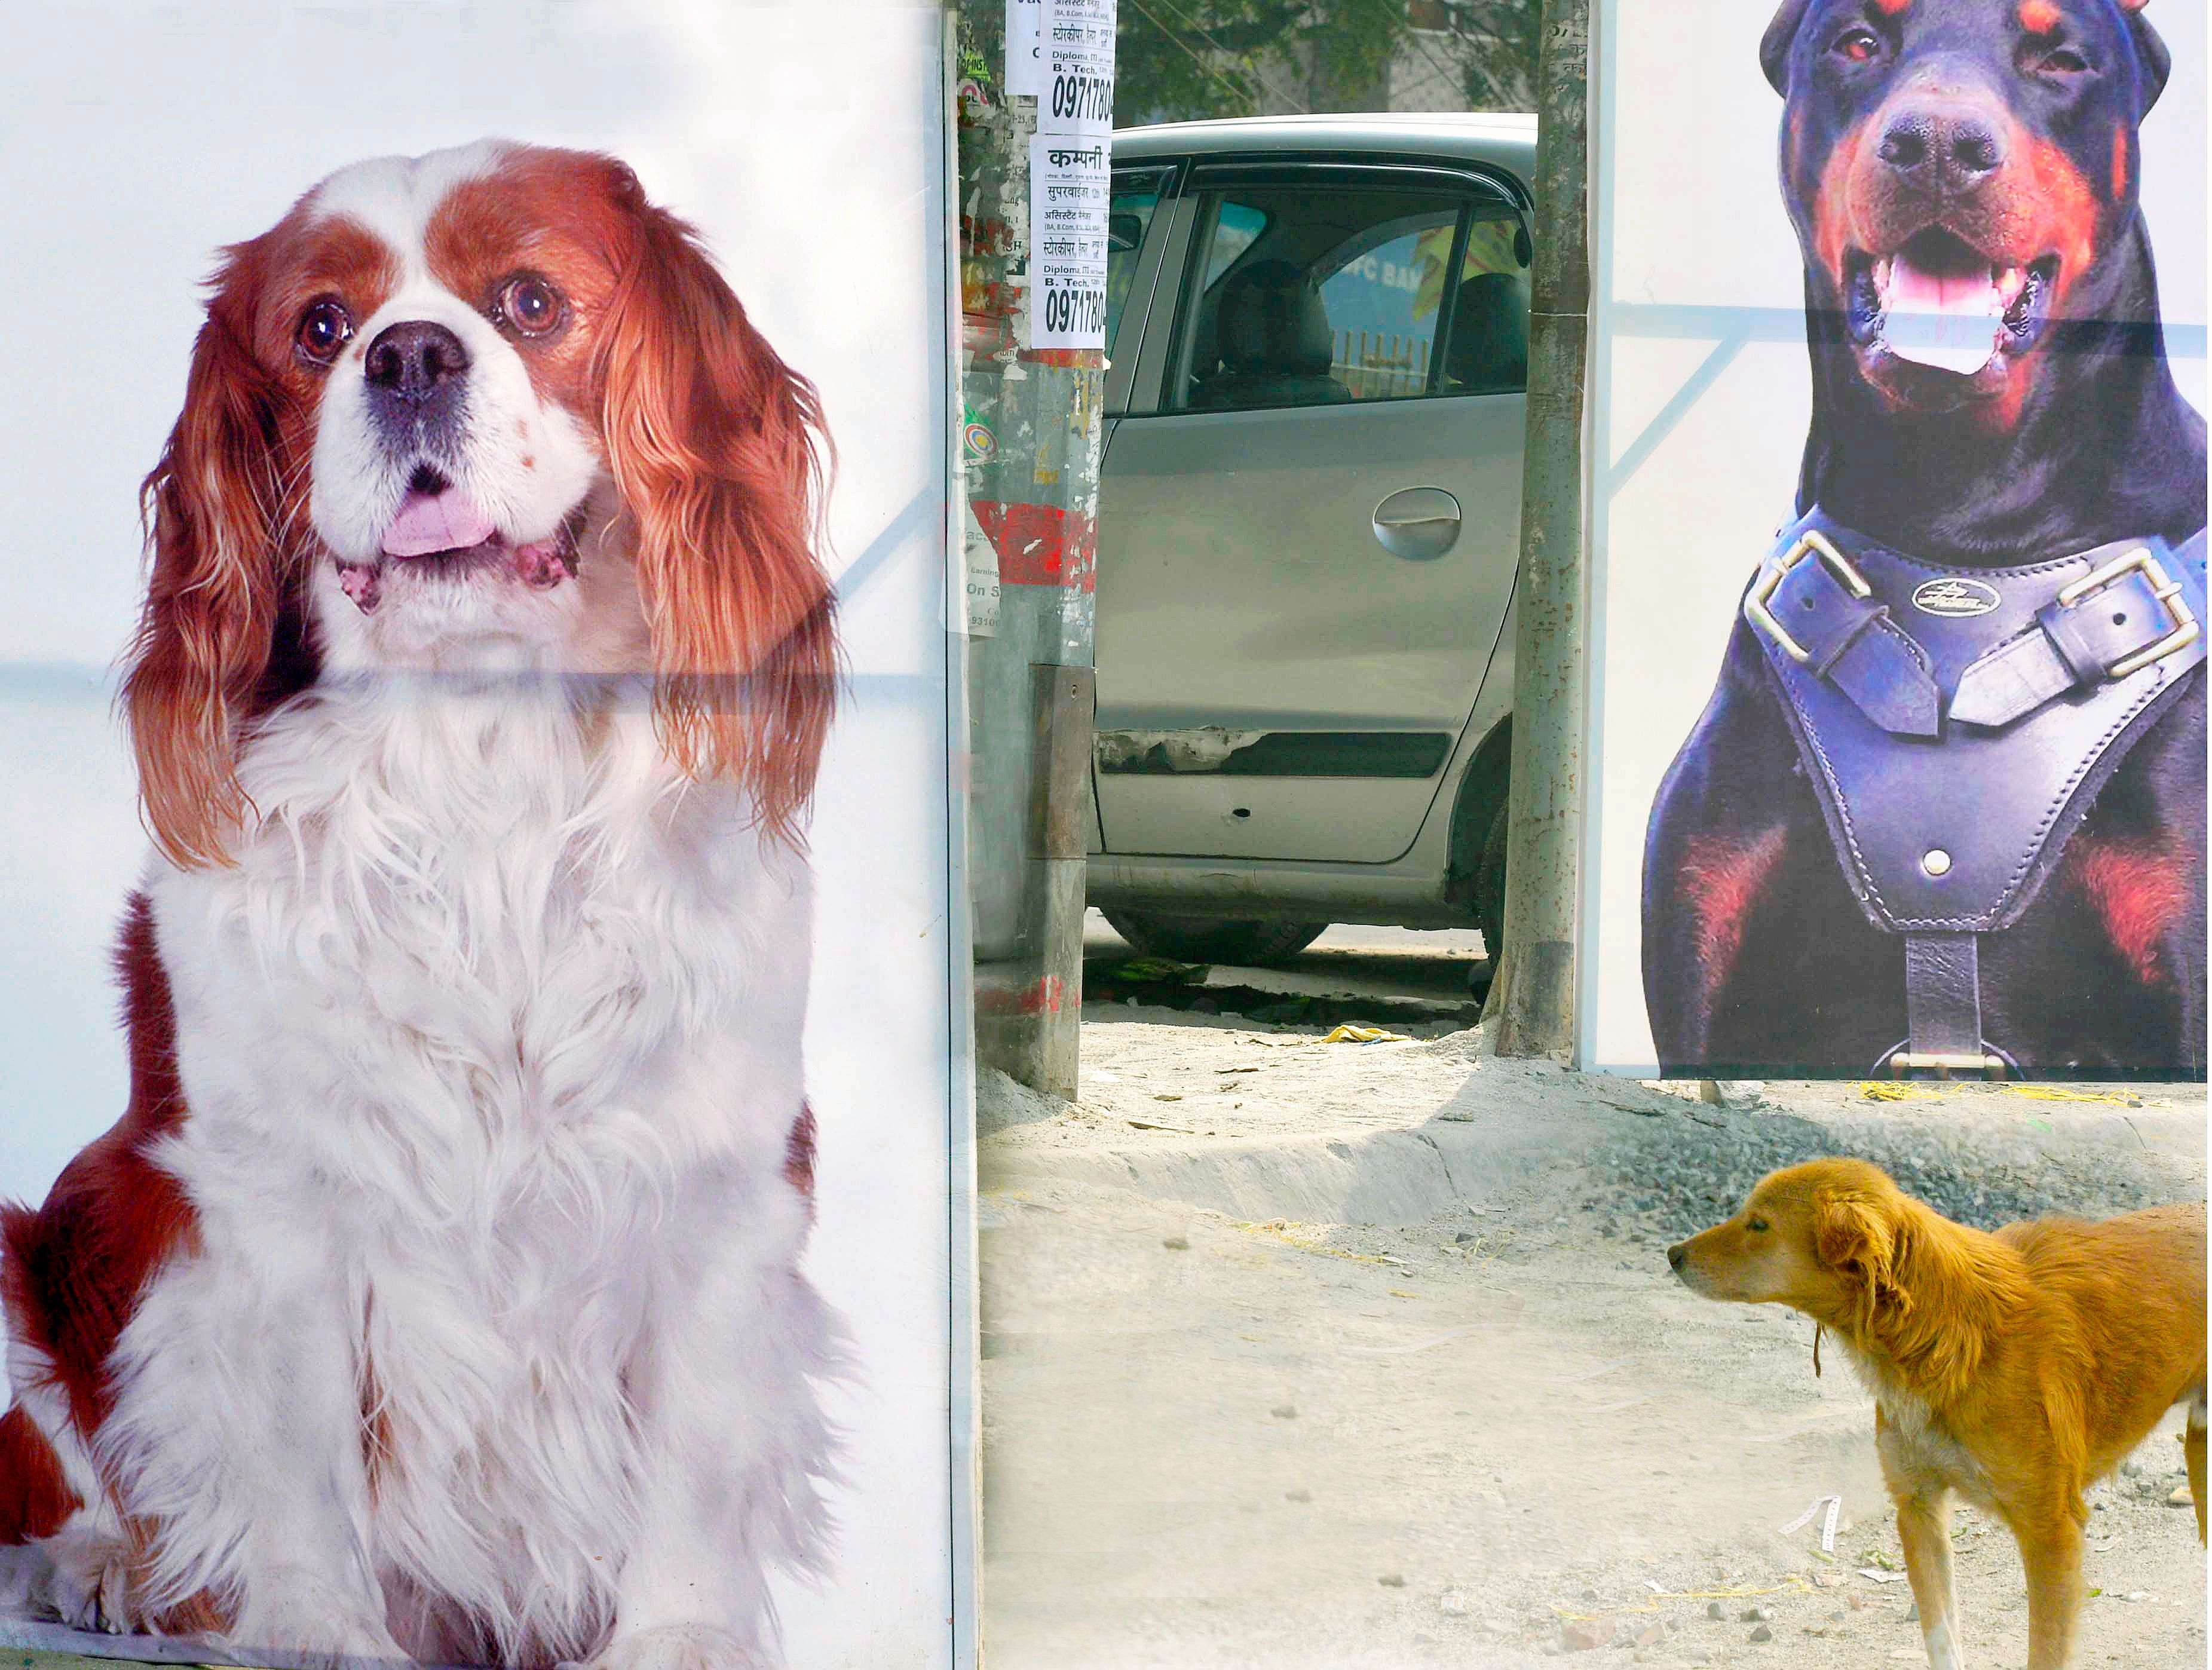 A BREED APART--------------- Welcome to Dogville. A stray dog standing near a Pet shop in Delhi.-----------------------PIC BY ANINDYA CHATTOPADHYAY